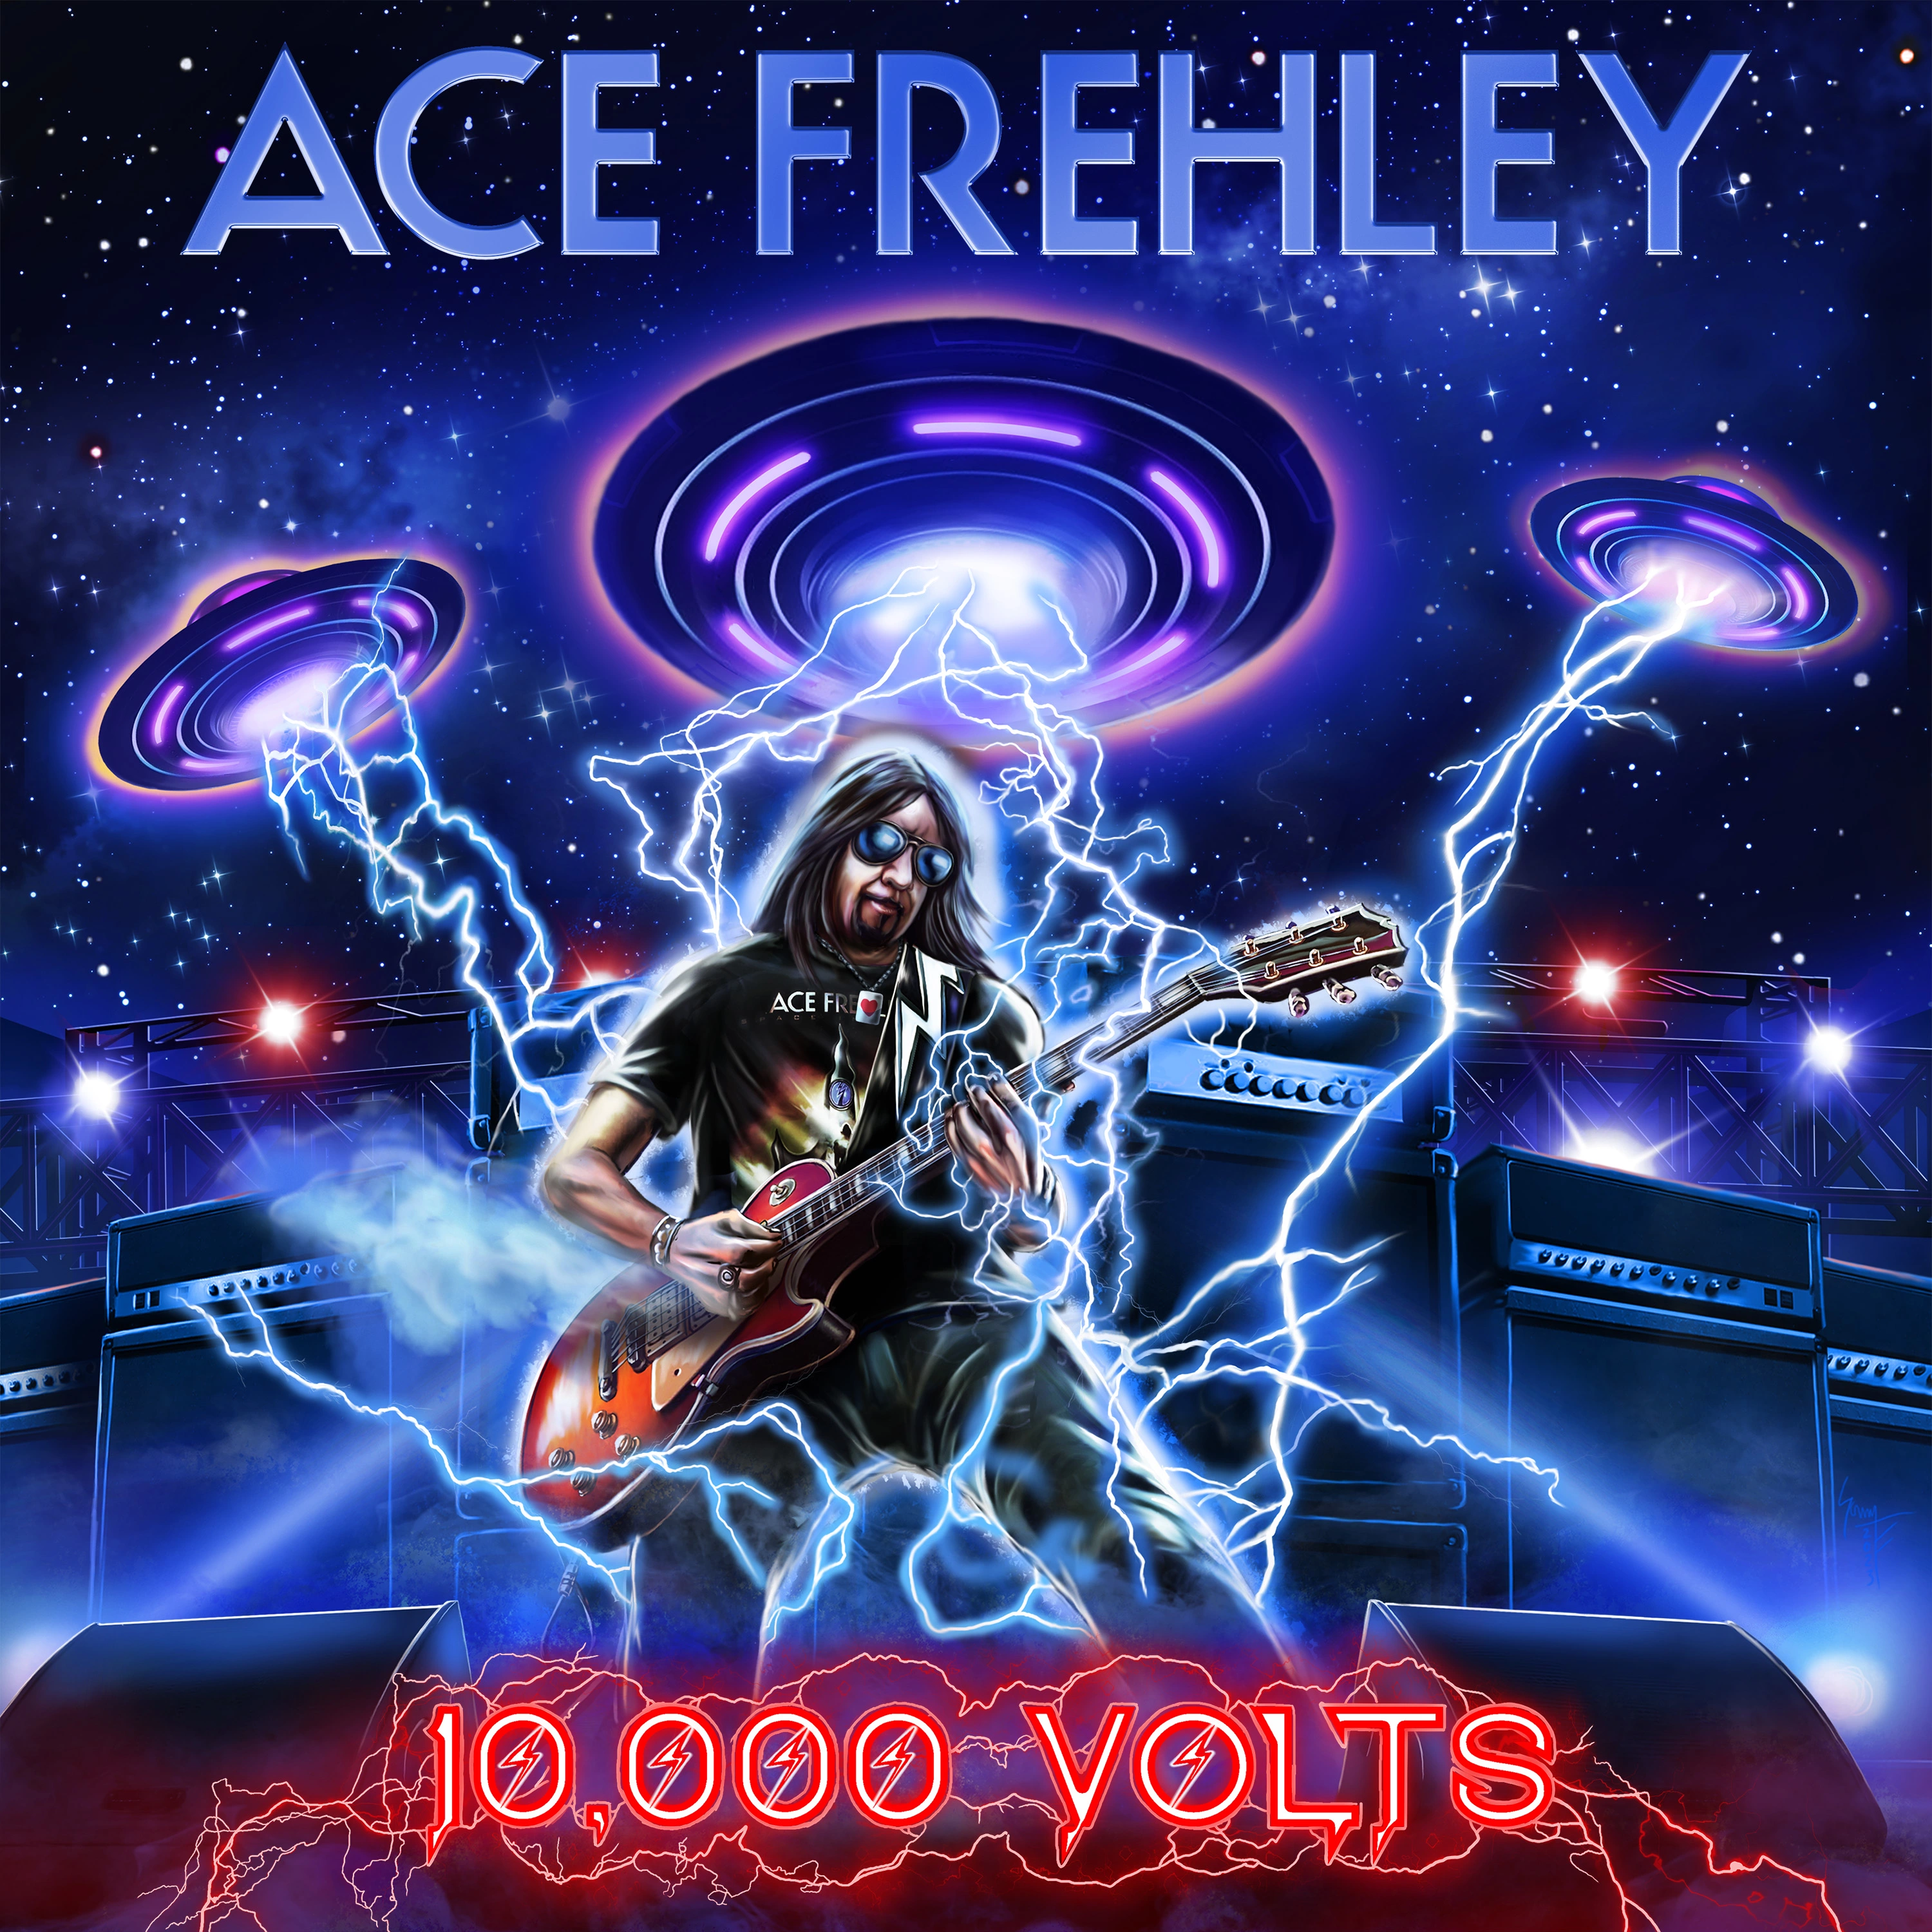 ACE FREHLEY - 10.000 Volts  [CD] - Foto 1 di 1